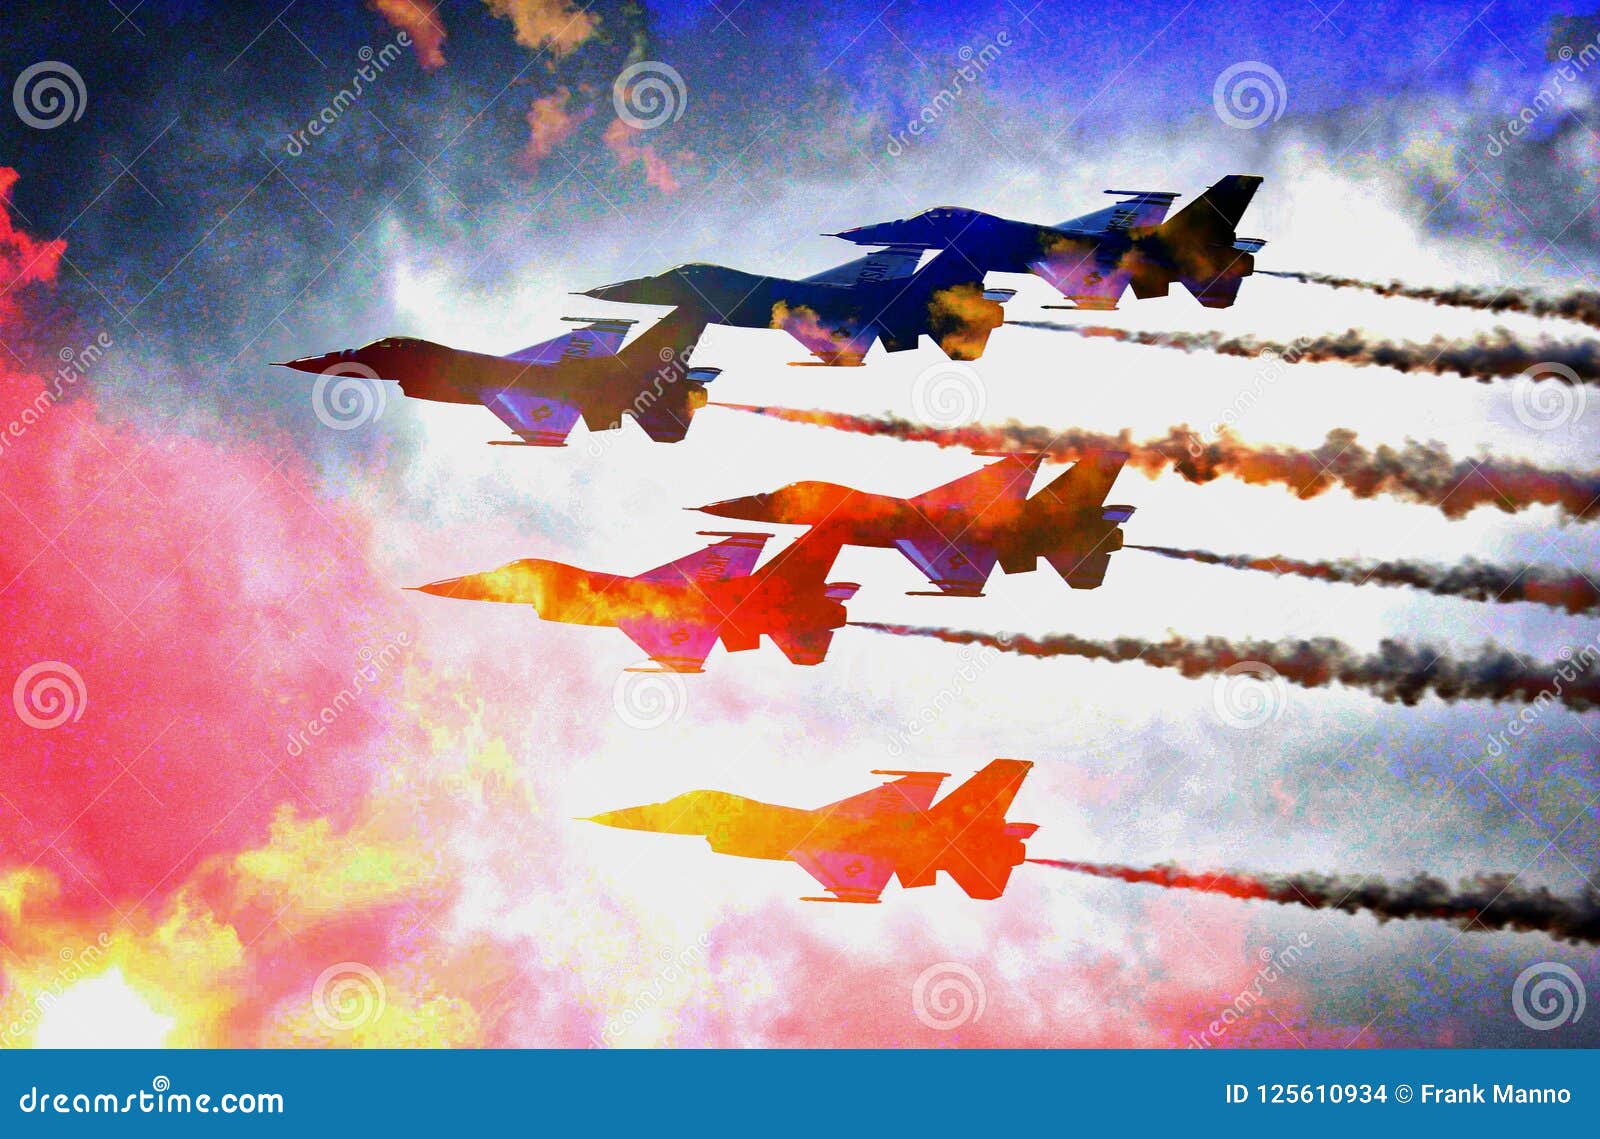 colorful cluster of air force jets flying in the clouds - teamwork!